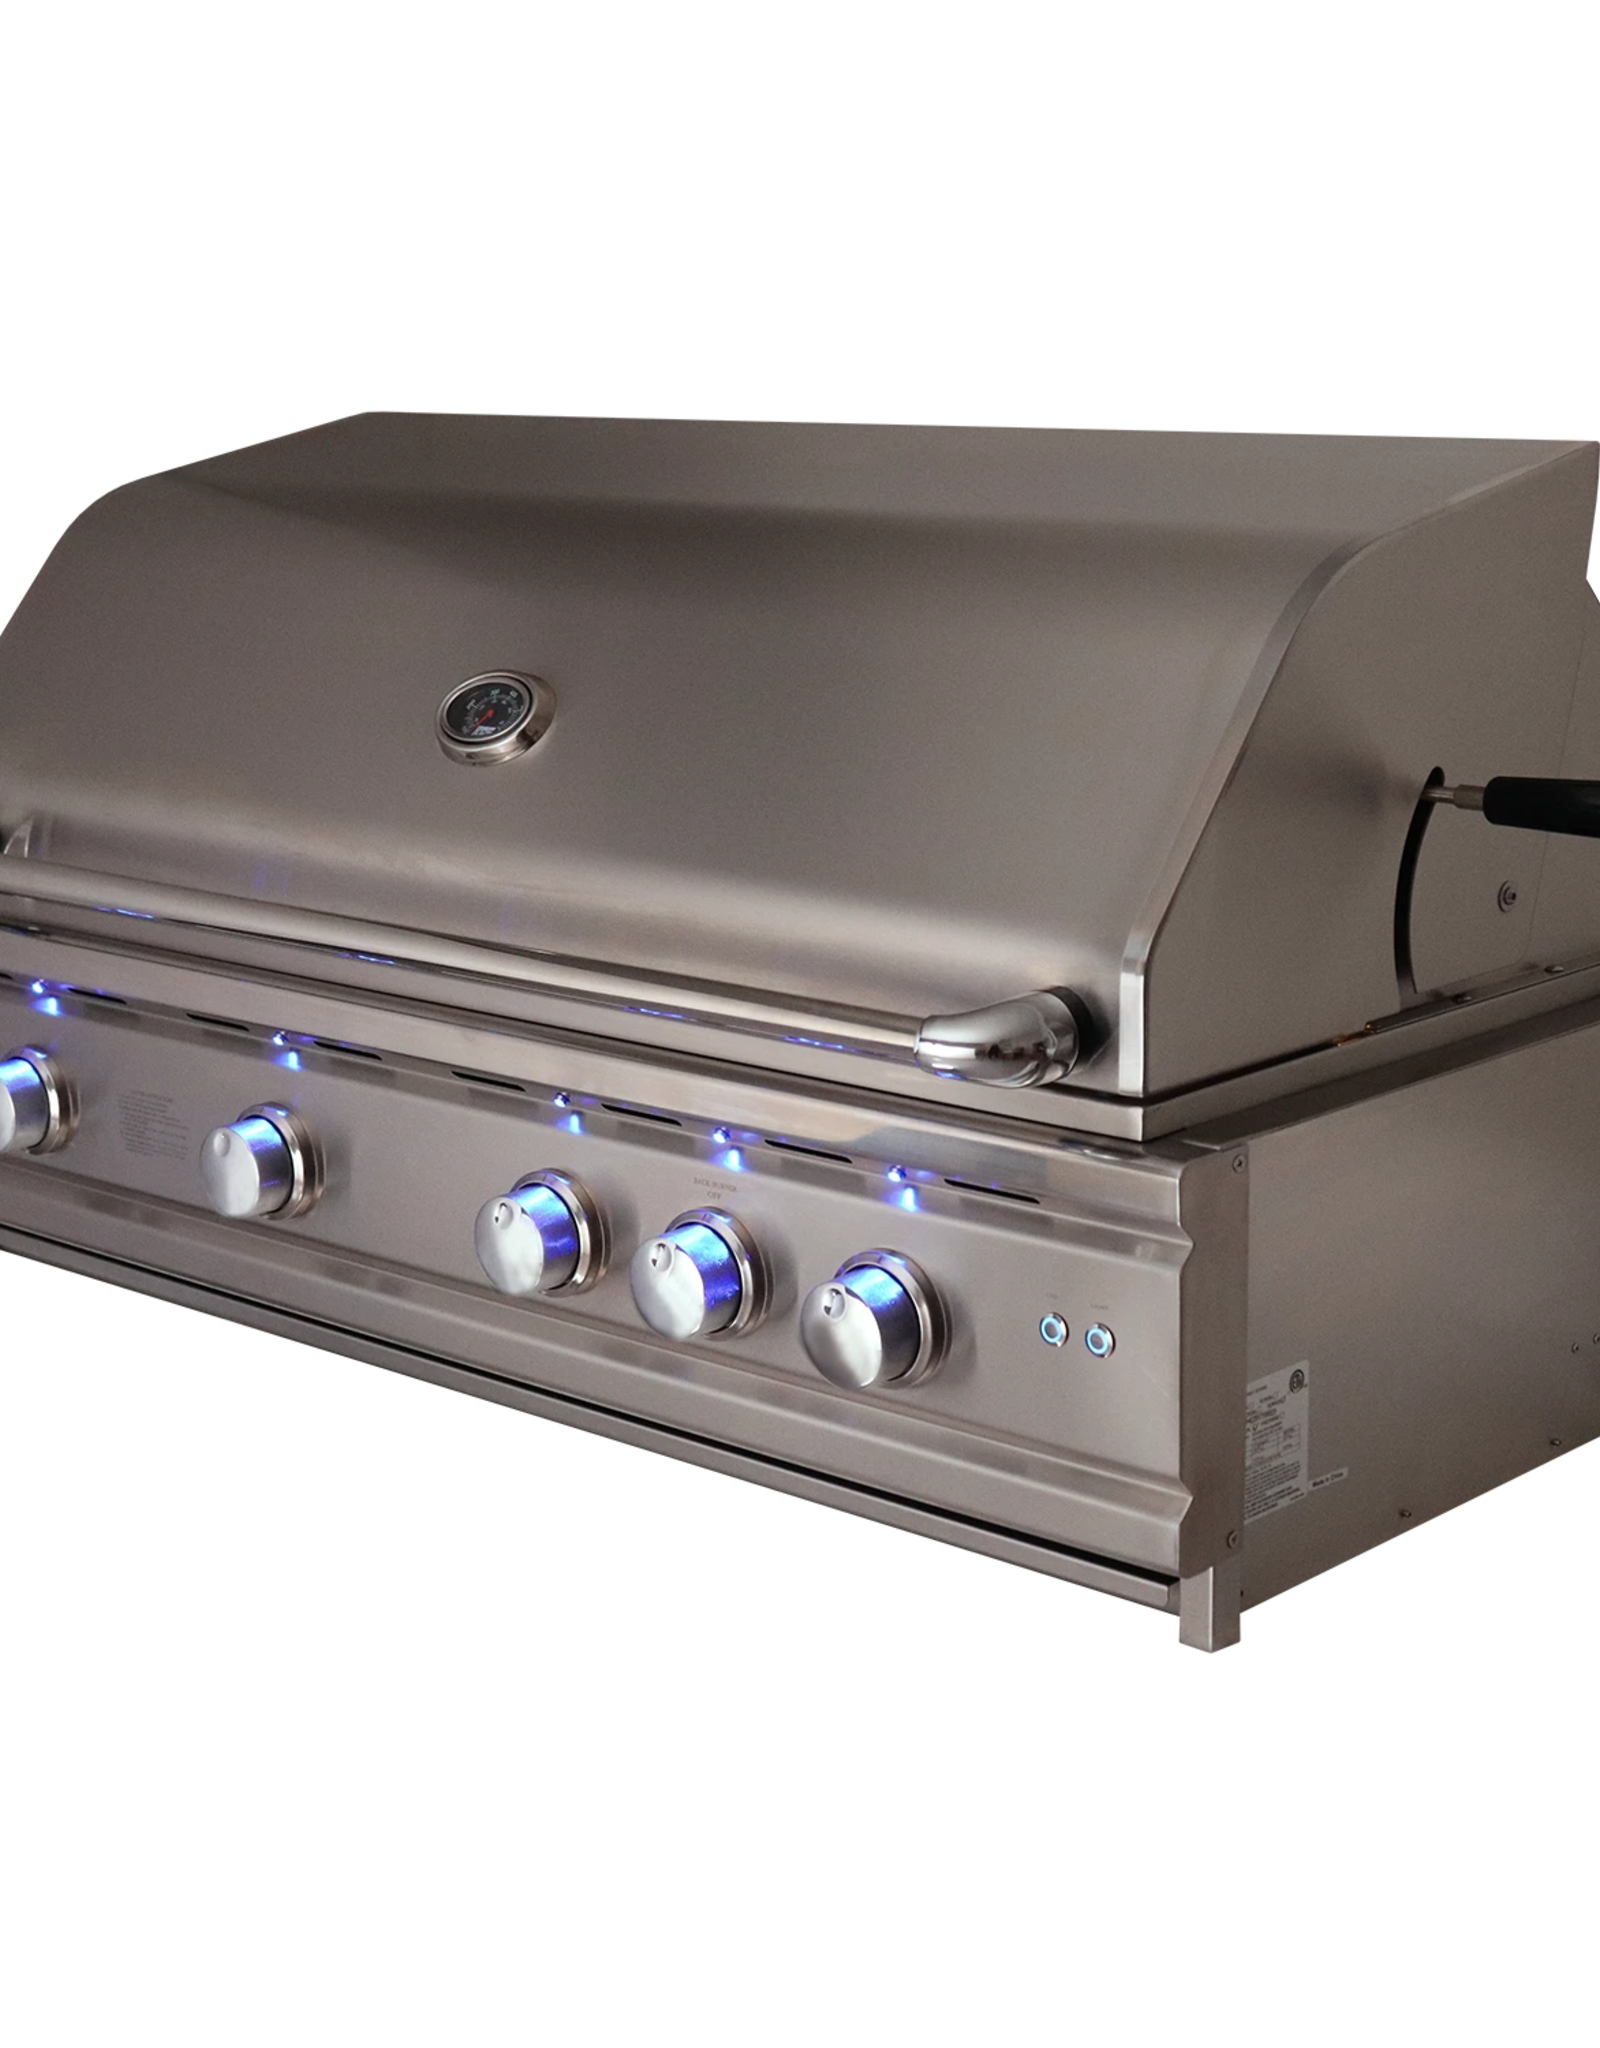 Renaissance Cooking Systems Renaissance Cooking Systems 42" Cutlass Pro Drop-In Grill - RON42A